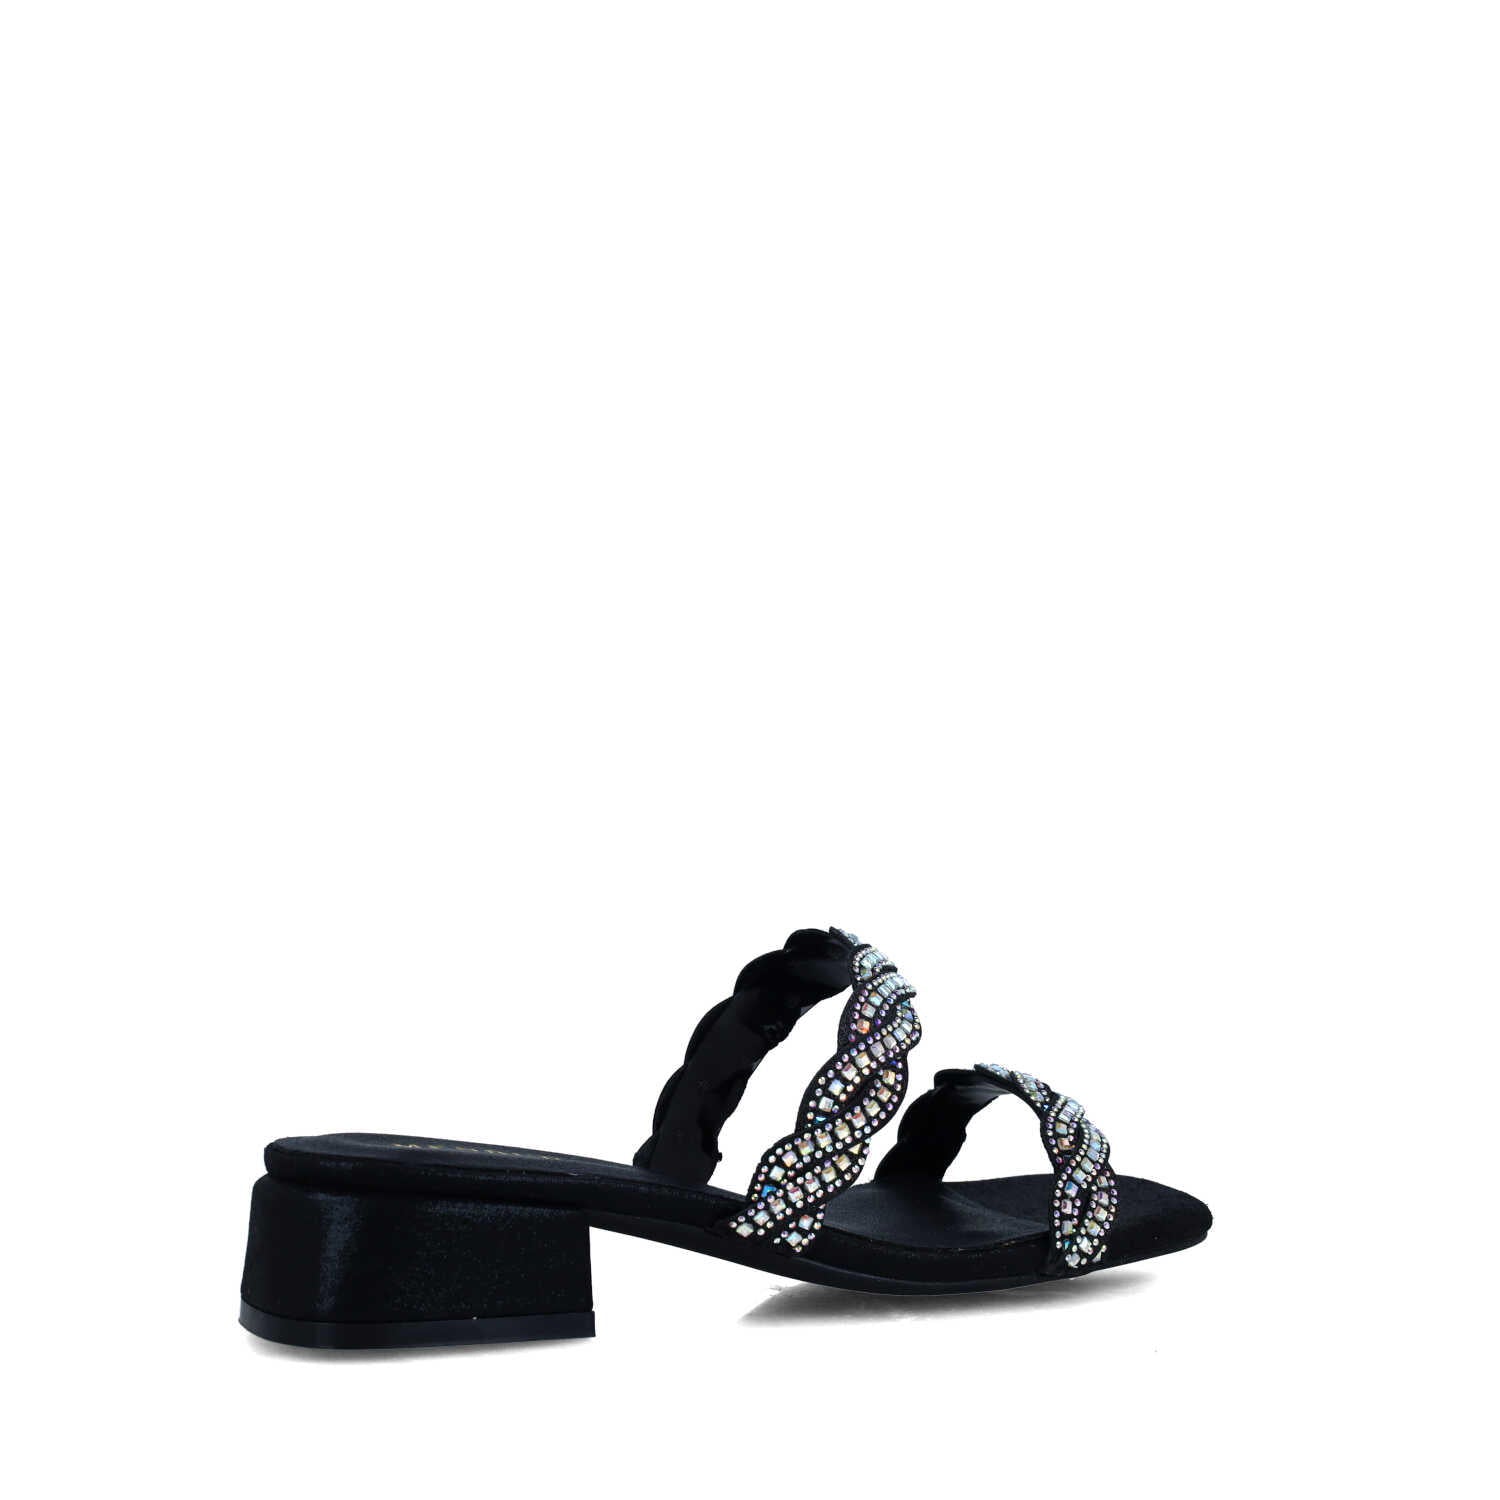 Black Slippers With Heel_24927_01_03